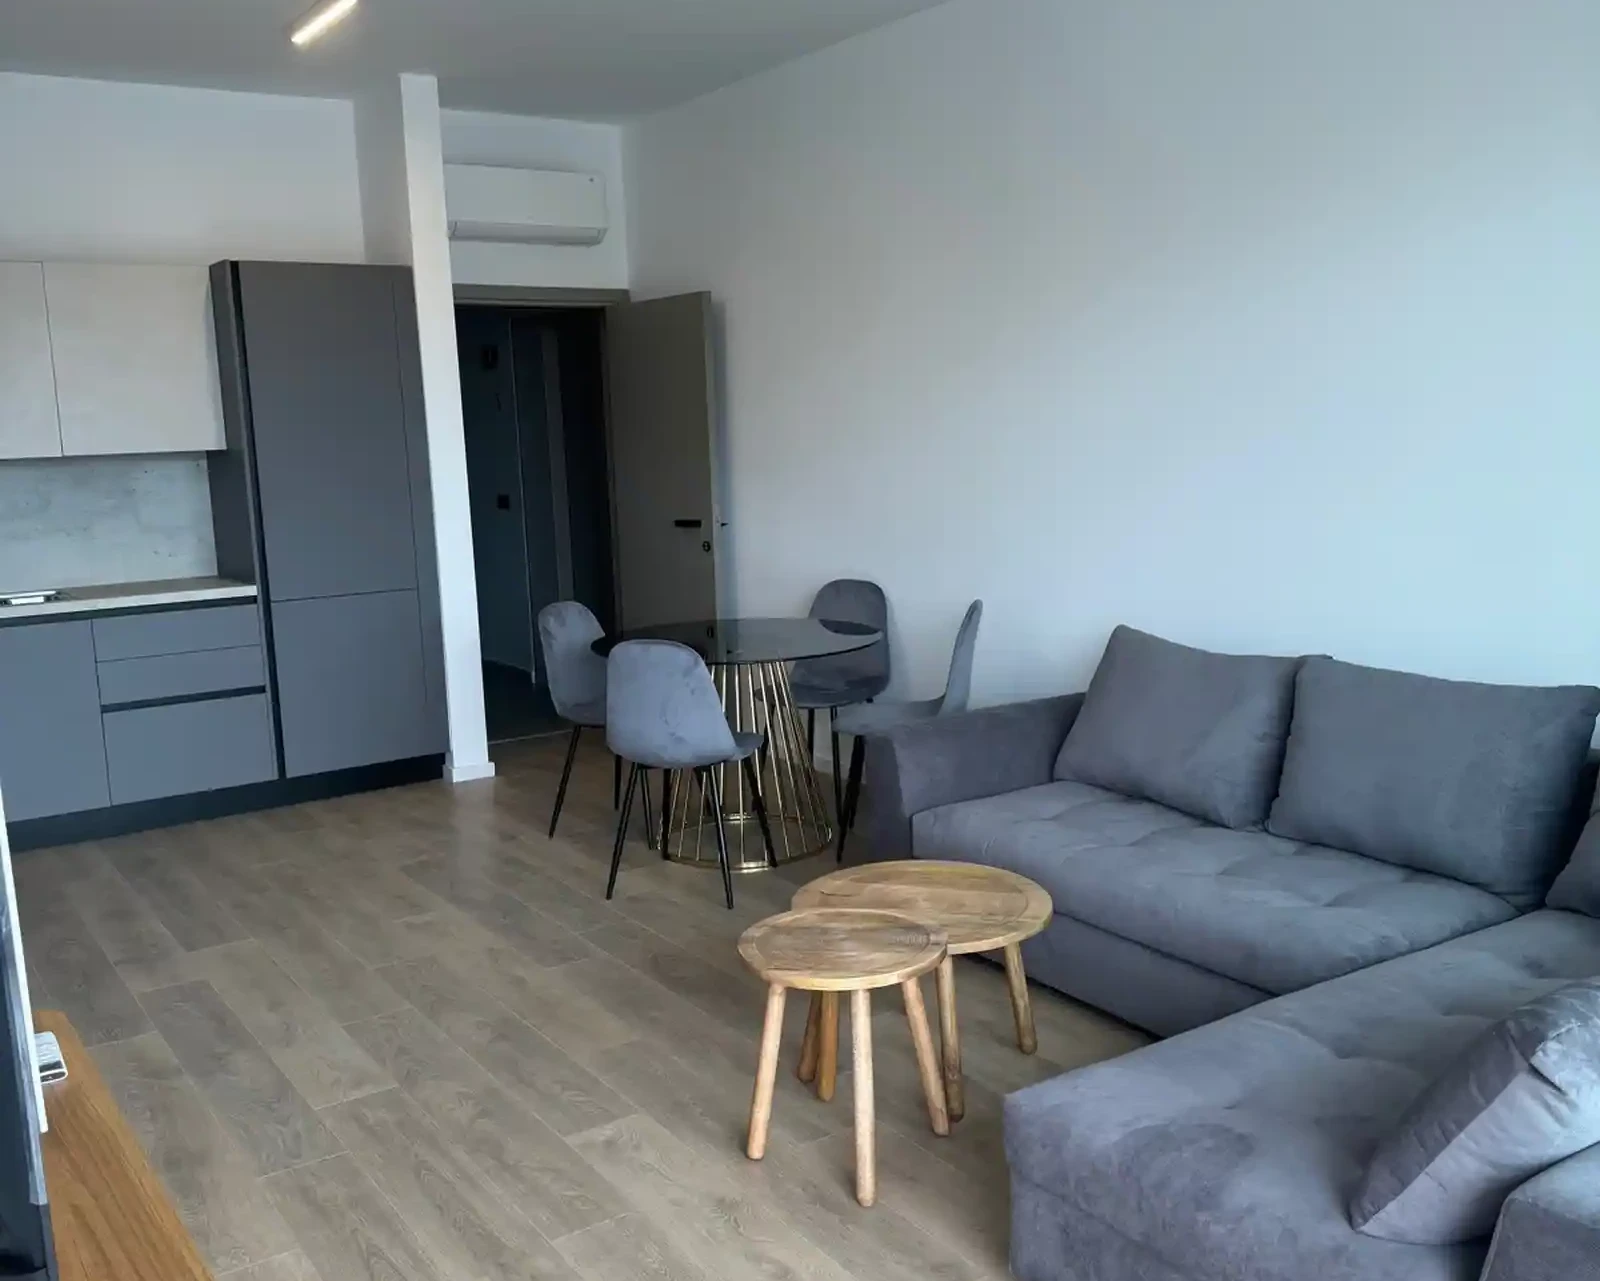 1-bedroom apartment to rent €1.650, image 1